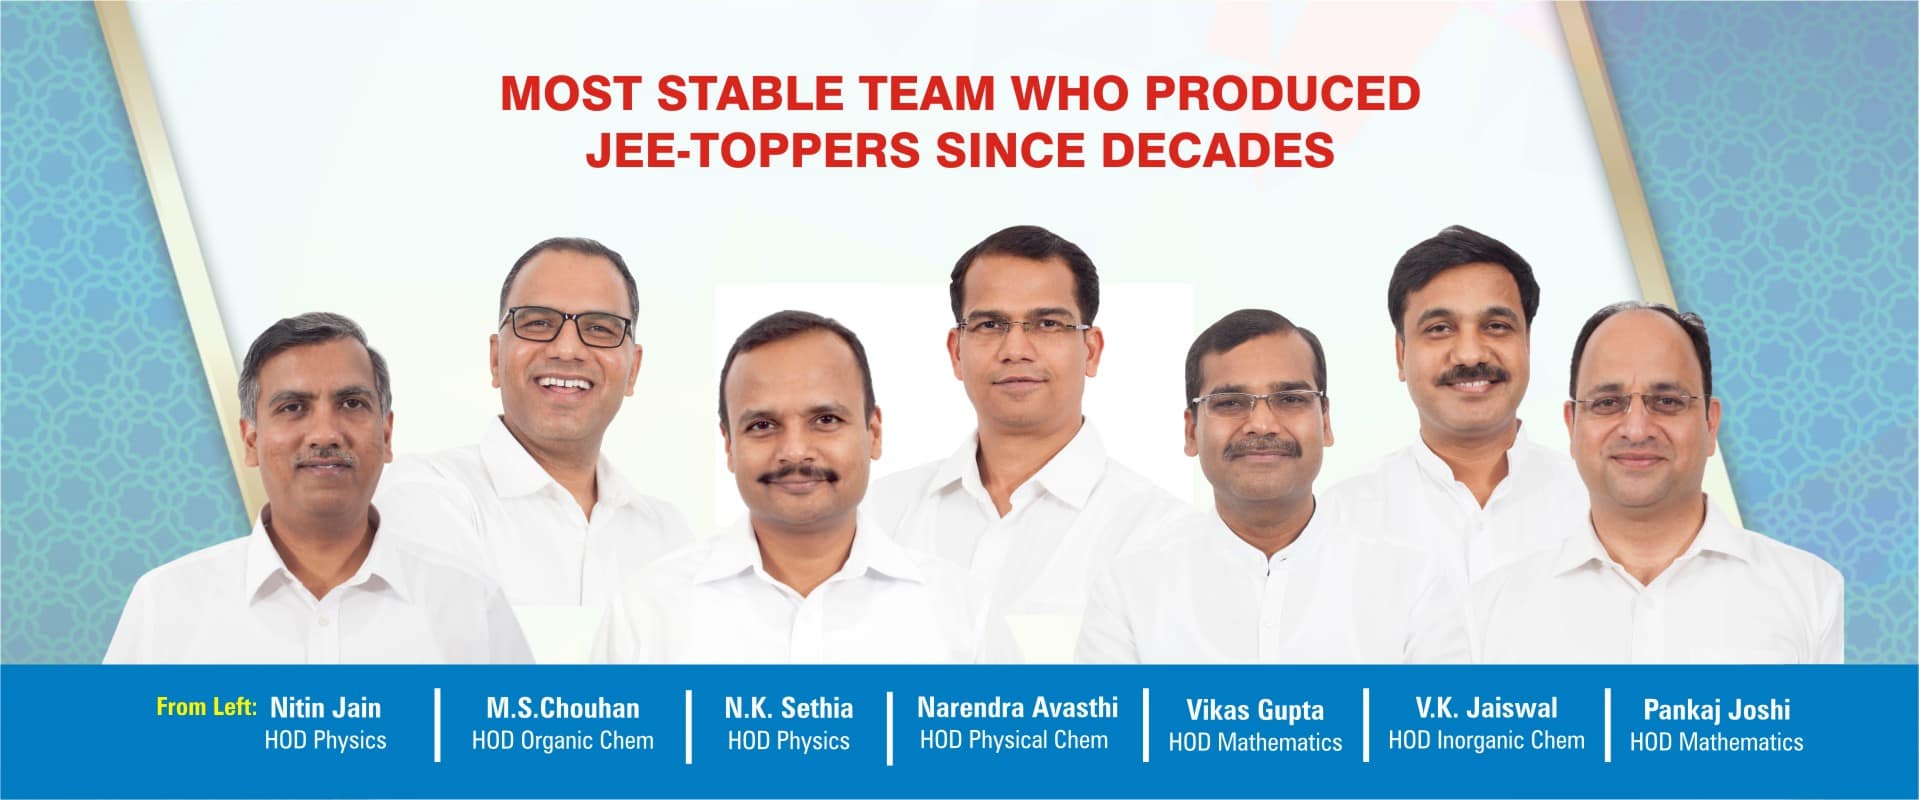 Most Stable Team who Produced Jee-Toppers since decades